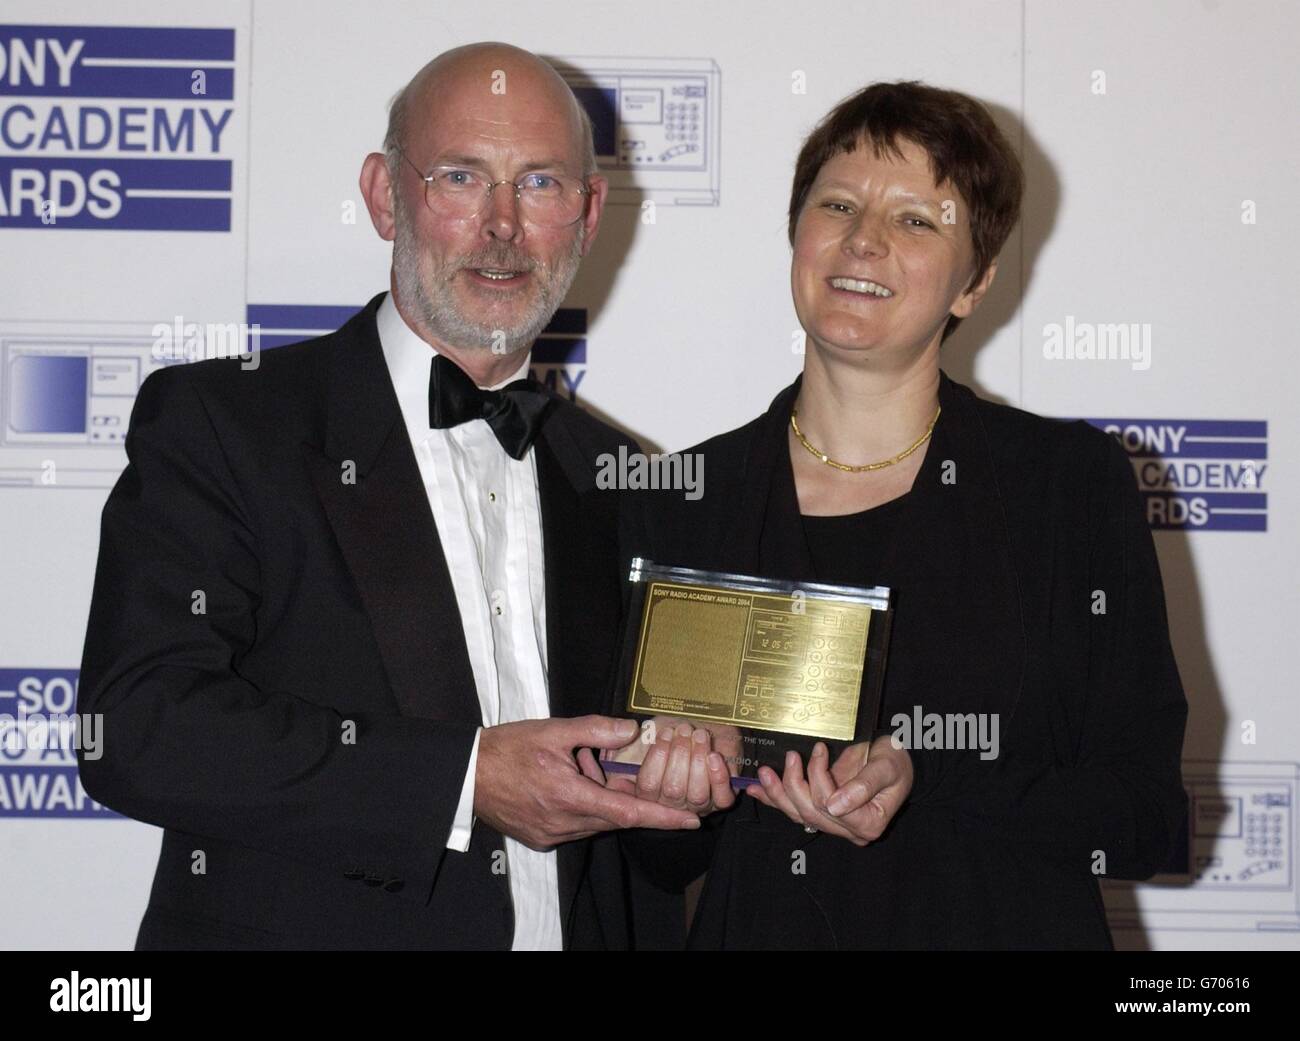 Chairman of the committee of the awards Tim Blackmore presents Helen Boaden - Controller of BBC Radio 4 - with the Station of the Year Award for BBC Radio 4 during the Sony Radio Academy Awards 2004, held at Grosvenor House hotel on Park Lane, London. The ceremony saw Jonathan Ross and Radio 1's Chris Moyles lose out to Xfm's Christian O'Connell, who was named DJ of the Year. Stock Photo